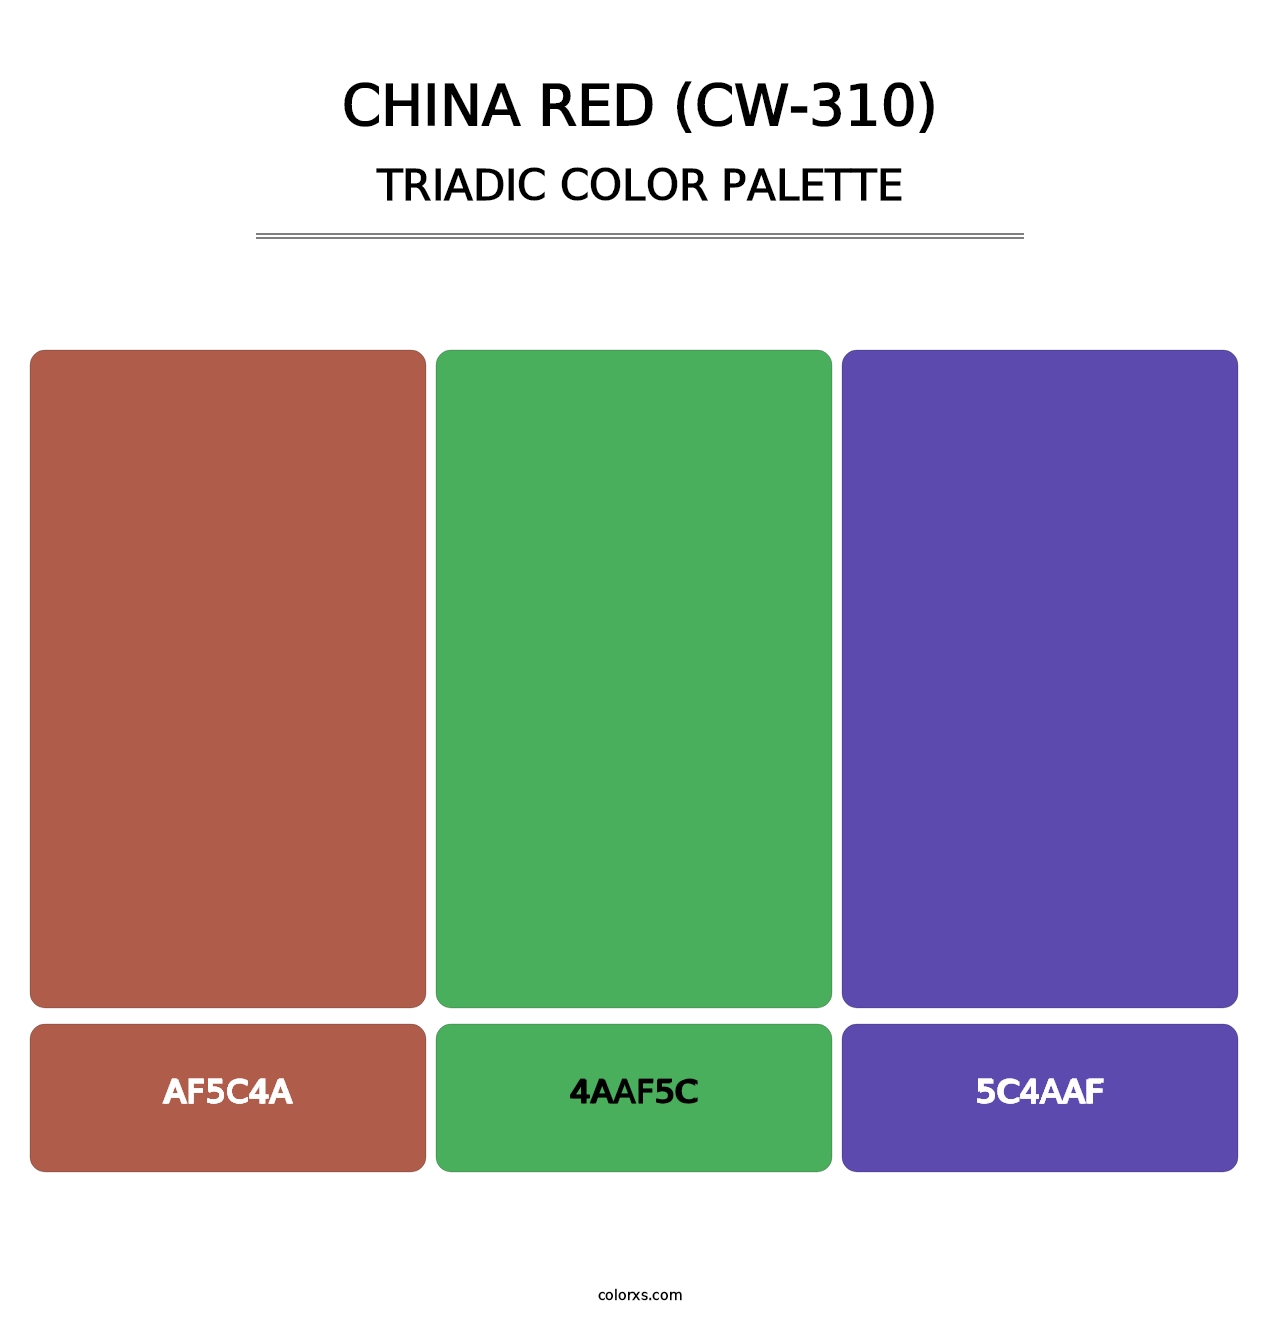 China Red (CW-310) - Triadic Color Palette